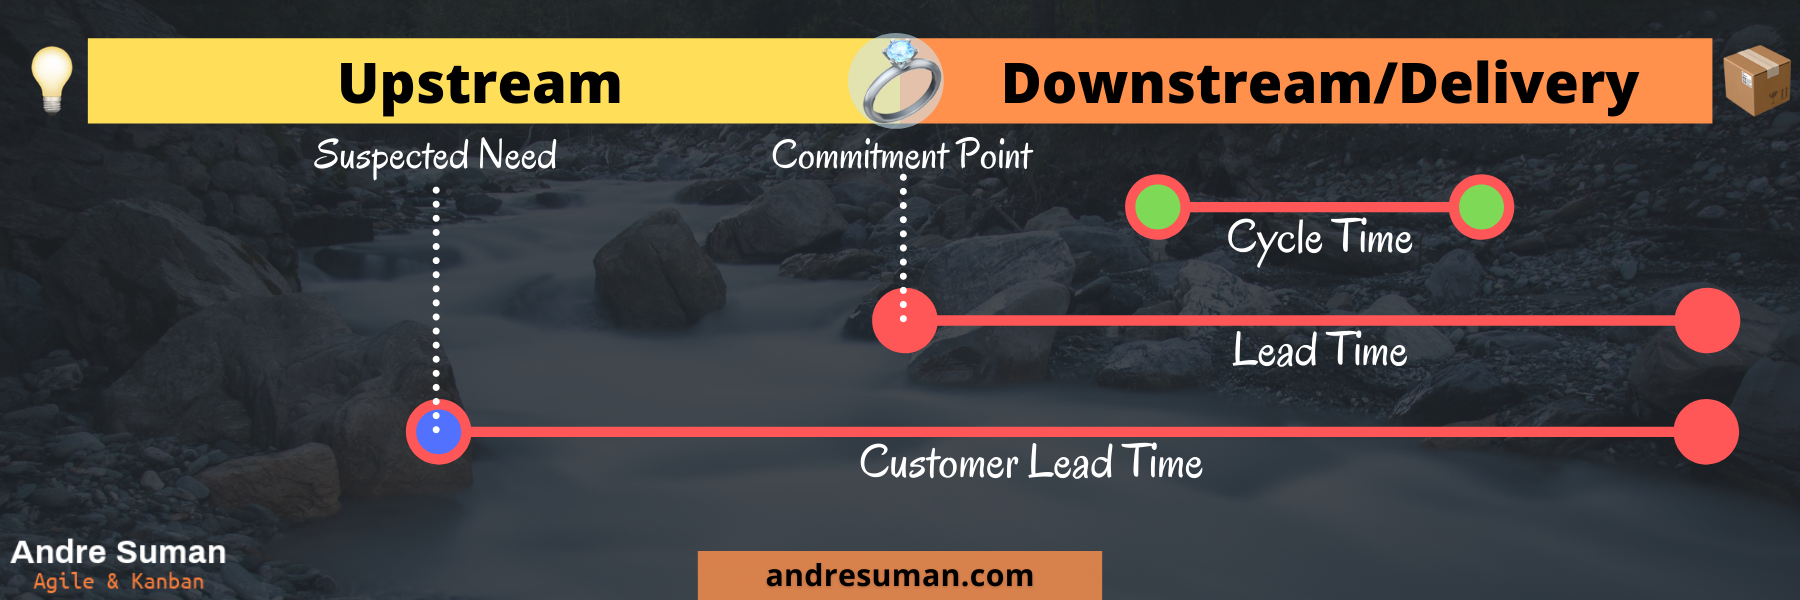 Lead Time Cycle Time Customer Lead TIme